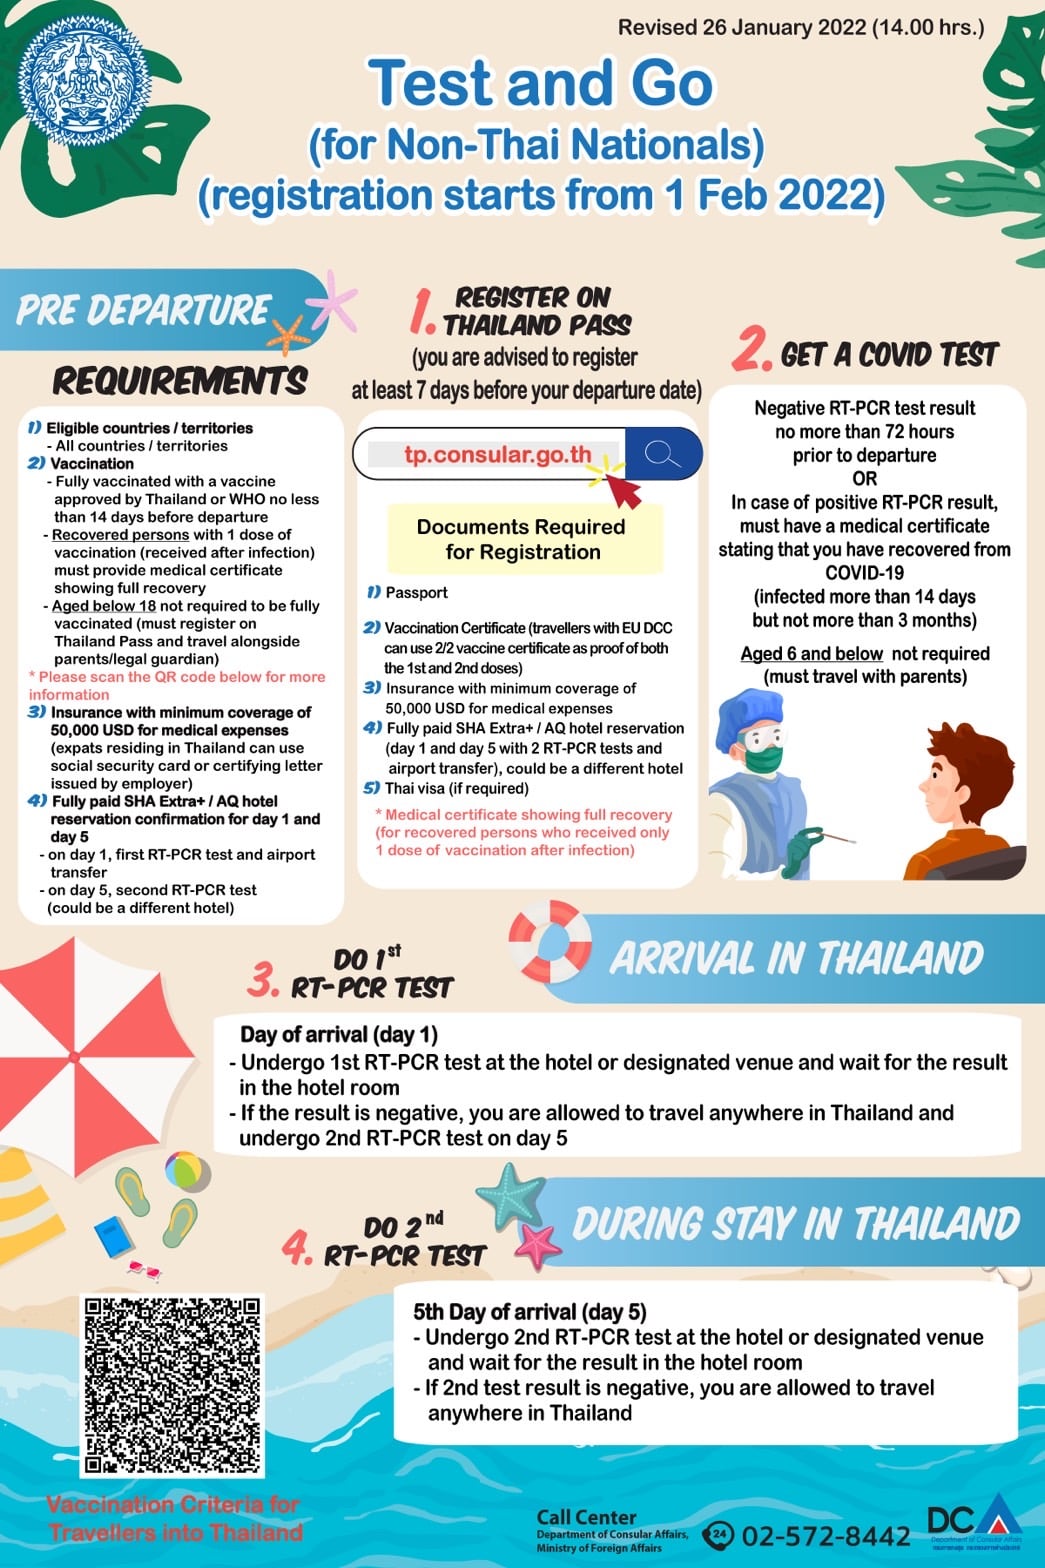 Test and Go (For Non-Thai Nationals registration starts from 1 Feb 2022